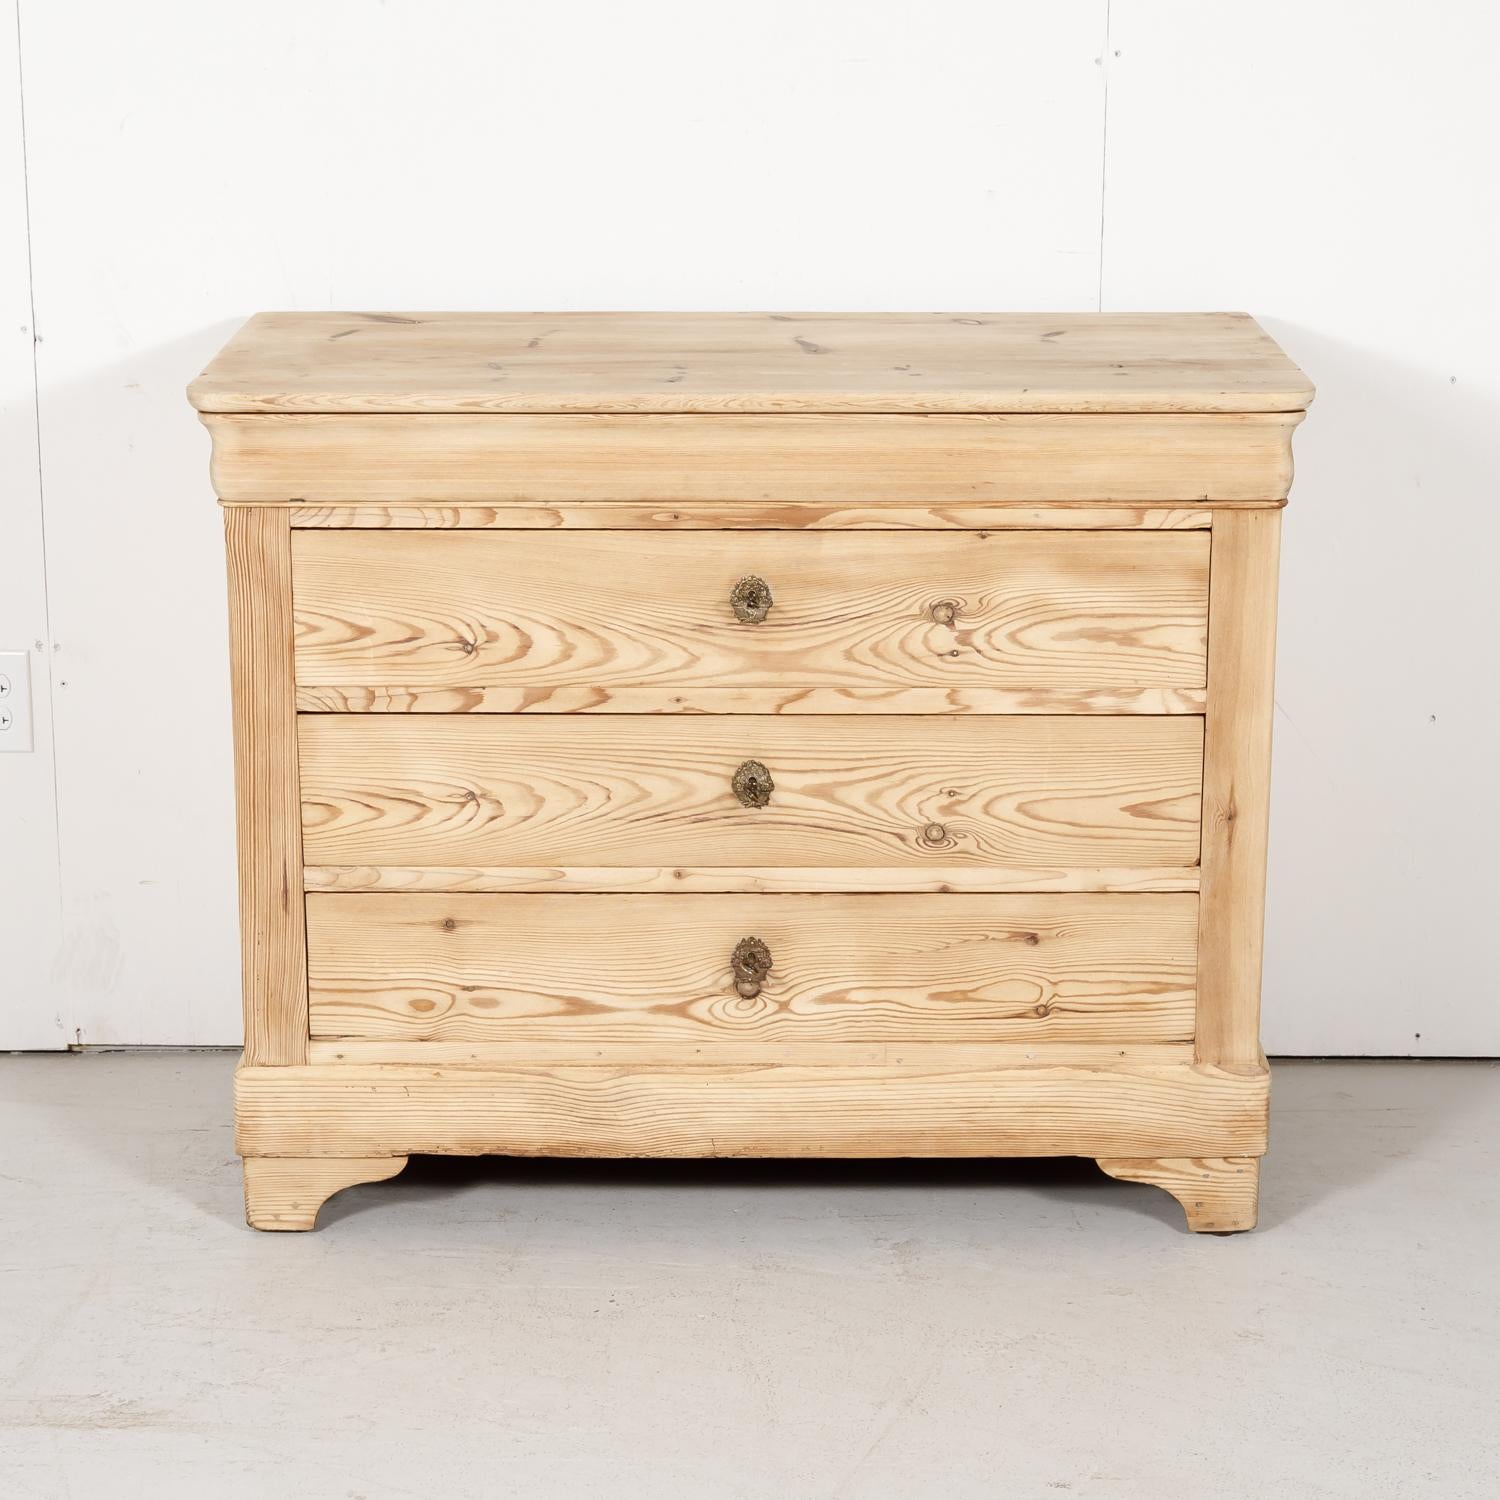 Antique French Louis Philippe style commode handcrafted of pine in the French Alps near Chamonix, circa 1890s. Sturdy and functional, this handsome bleached pine chest of drawers has a top doucine drawer and 3 full drawers below and the typical